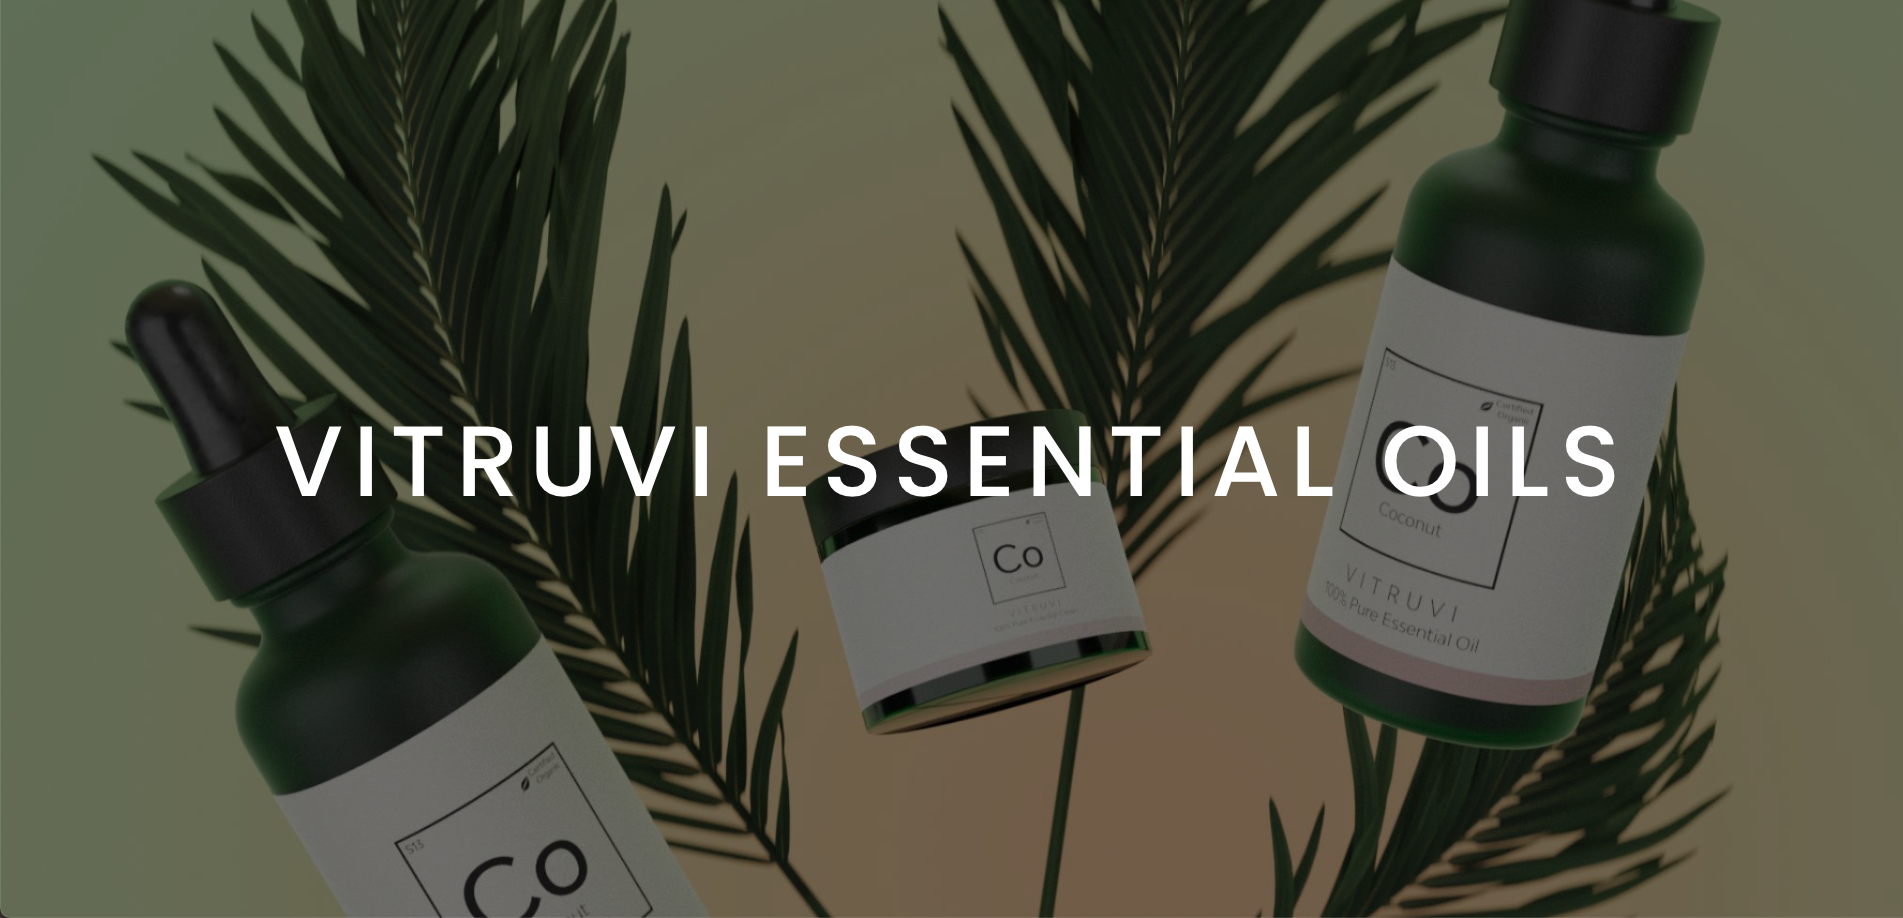 IU VITRUVI ESSENTIAL OILS Featured Image with white logo on backdrop of cream, drop and spray containers with herbs